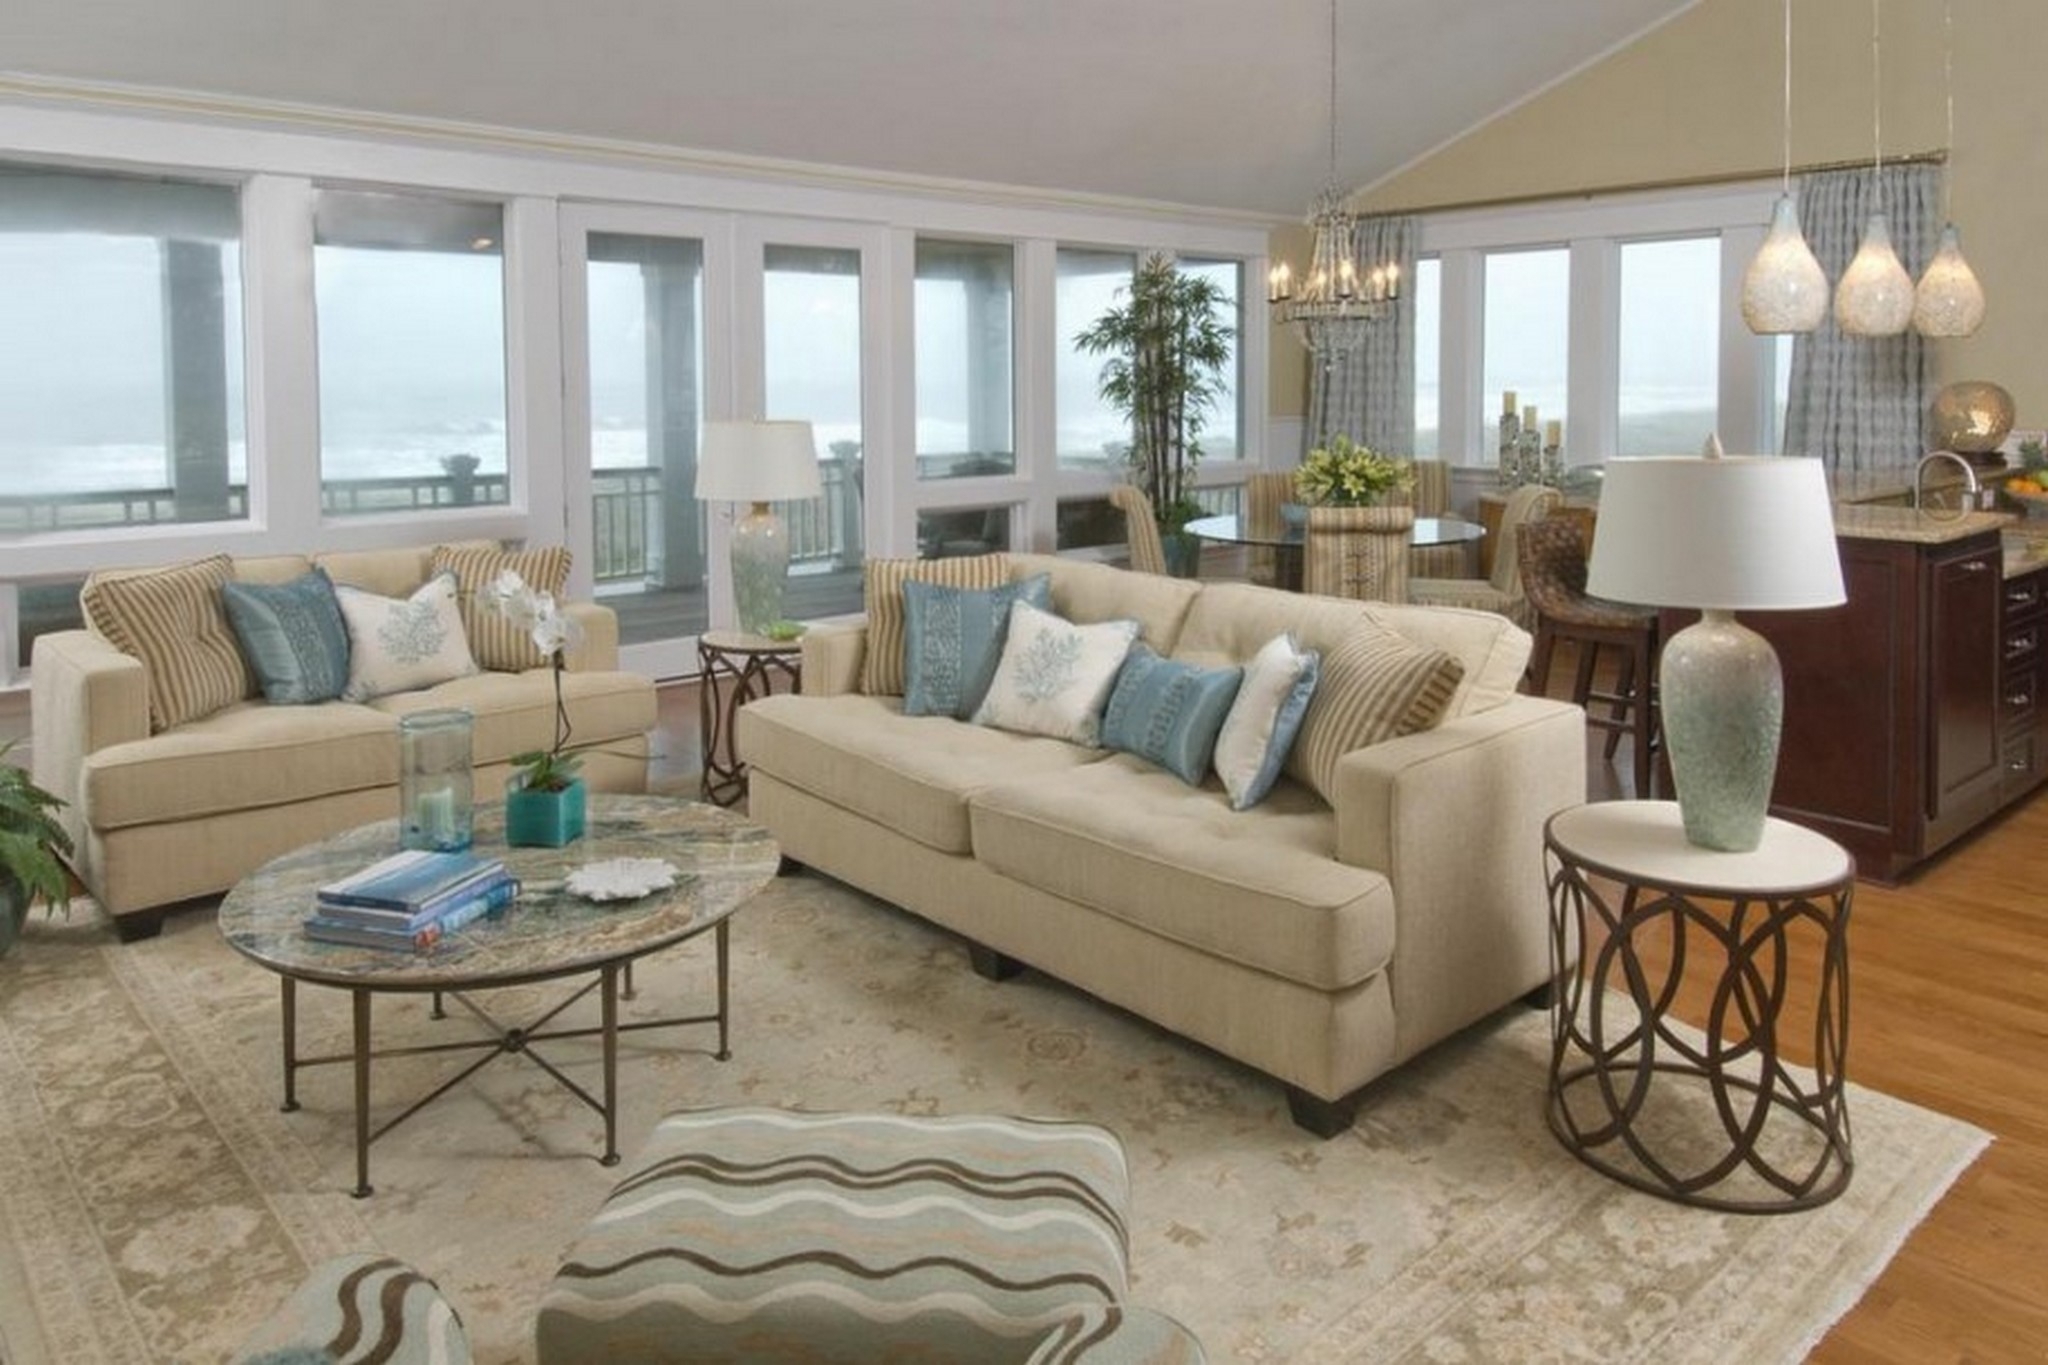 Rustic Beach Decorating Ideas For Living Room With Extra Large Rugs 